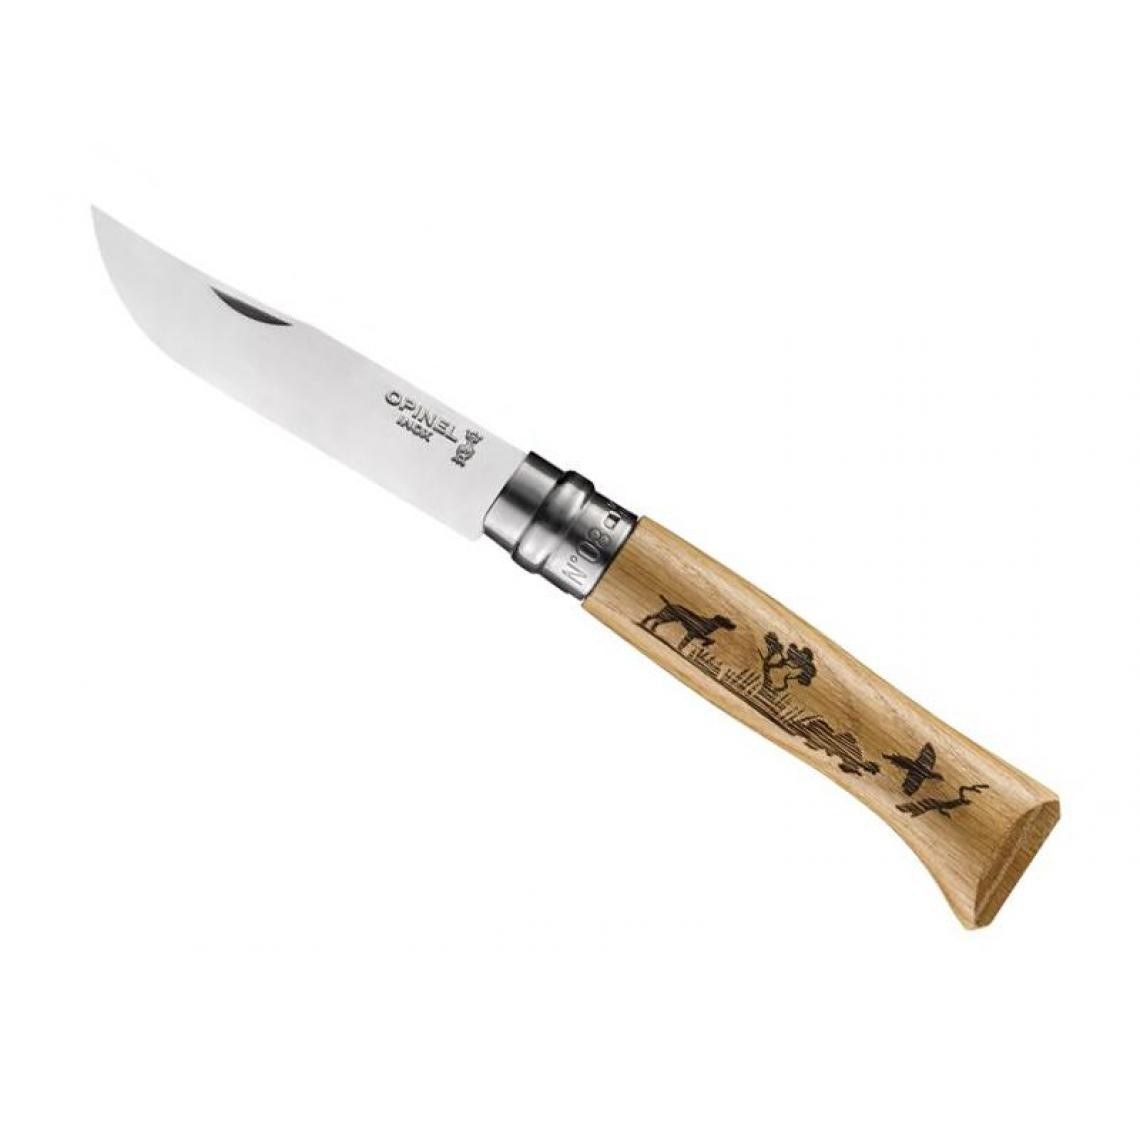 Opinel - OPINEL - 92335 - OPINEL ANIMALIA 3 CHENE 8 VRI CHIEN - Outils de coupe